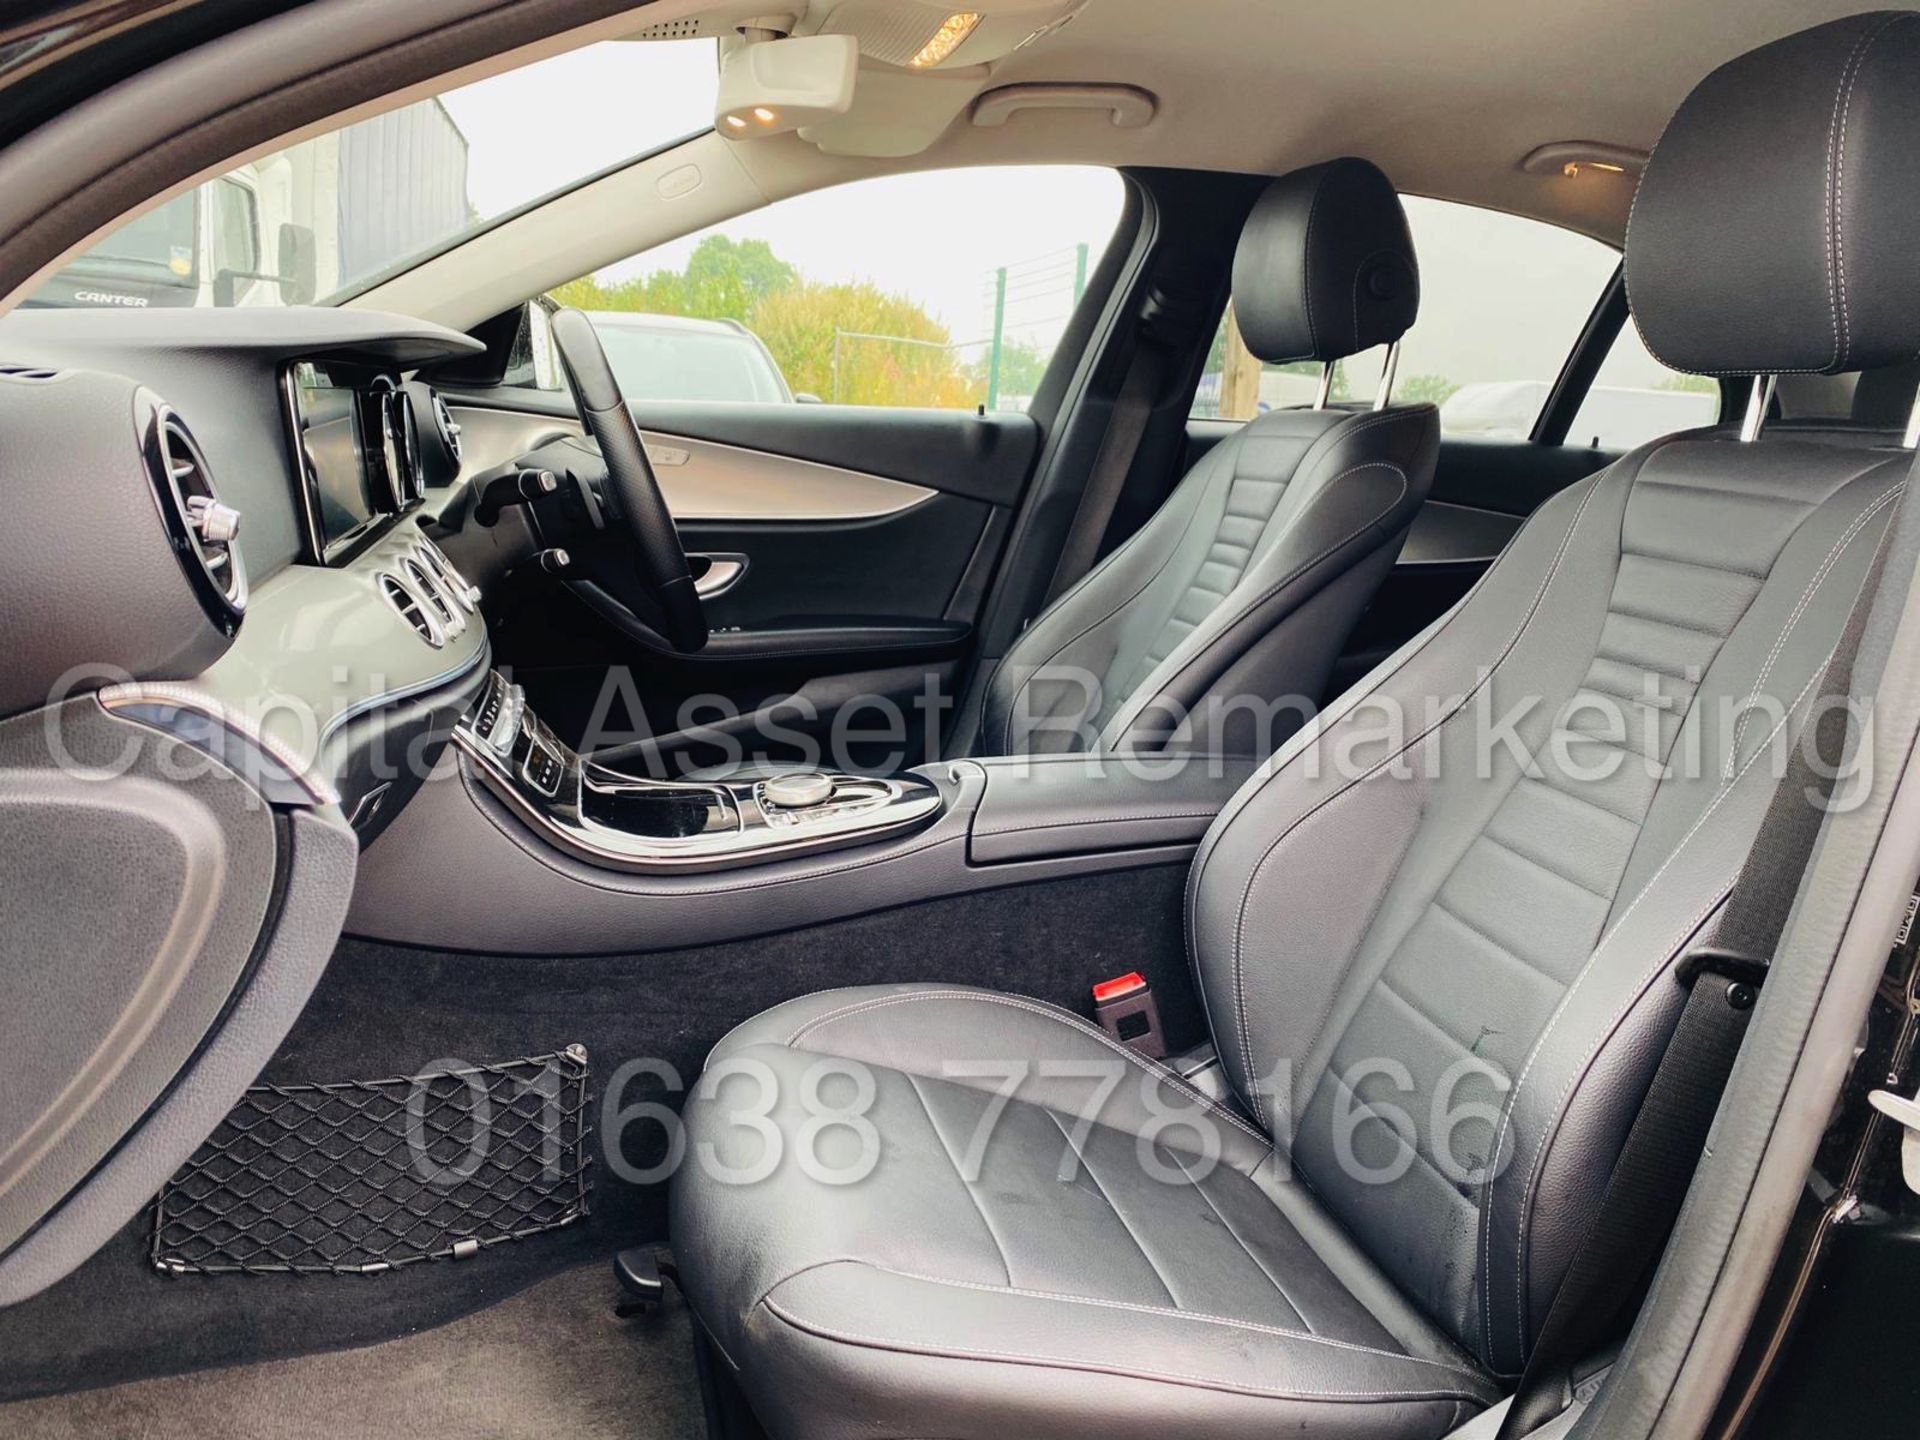 (ON SALE) MERCEDES-BENZ E220D *SALOON* (2018 - NEW MODEL) '9-G TRONIC AUTO - LEATHER - SAT NAV' - Image 26 of 52